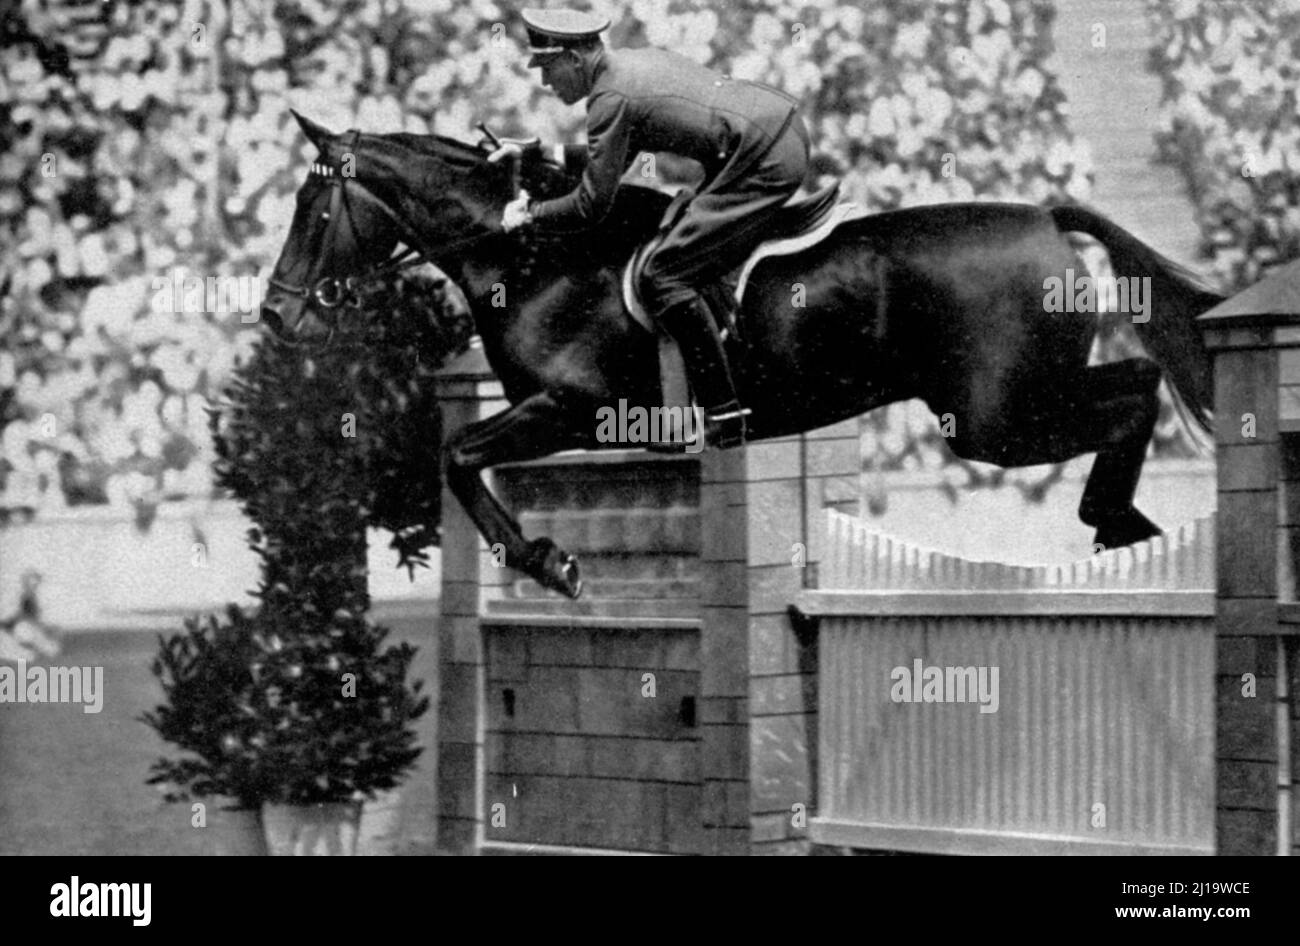 Riding, Captain Stubbendorf won the gold medal in the eventing competition on Nurmi Stock Photo